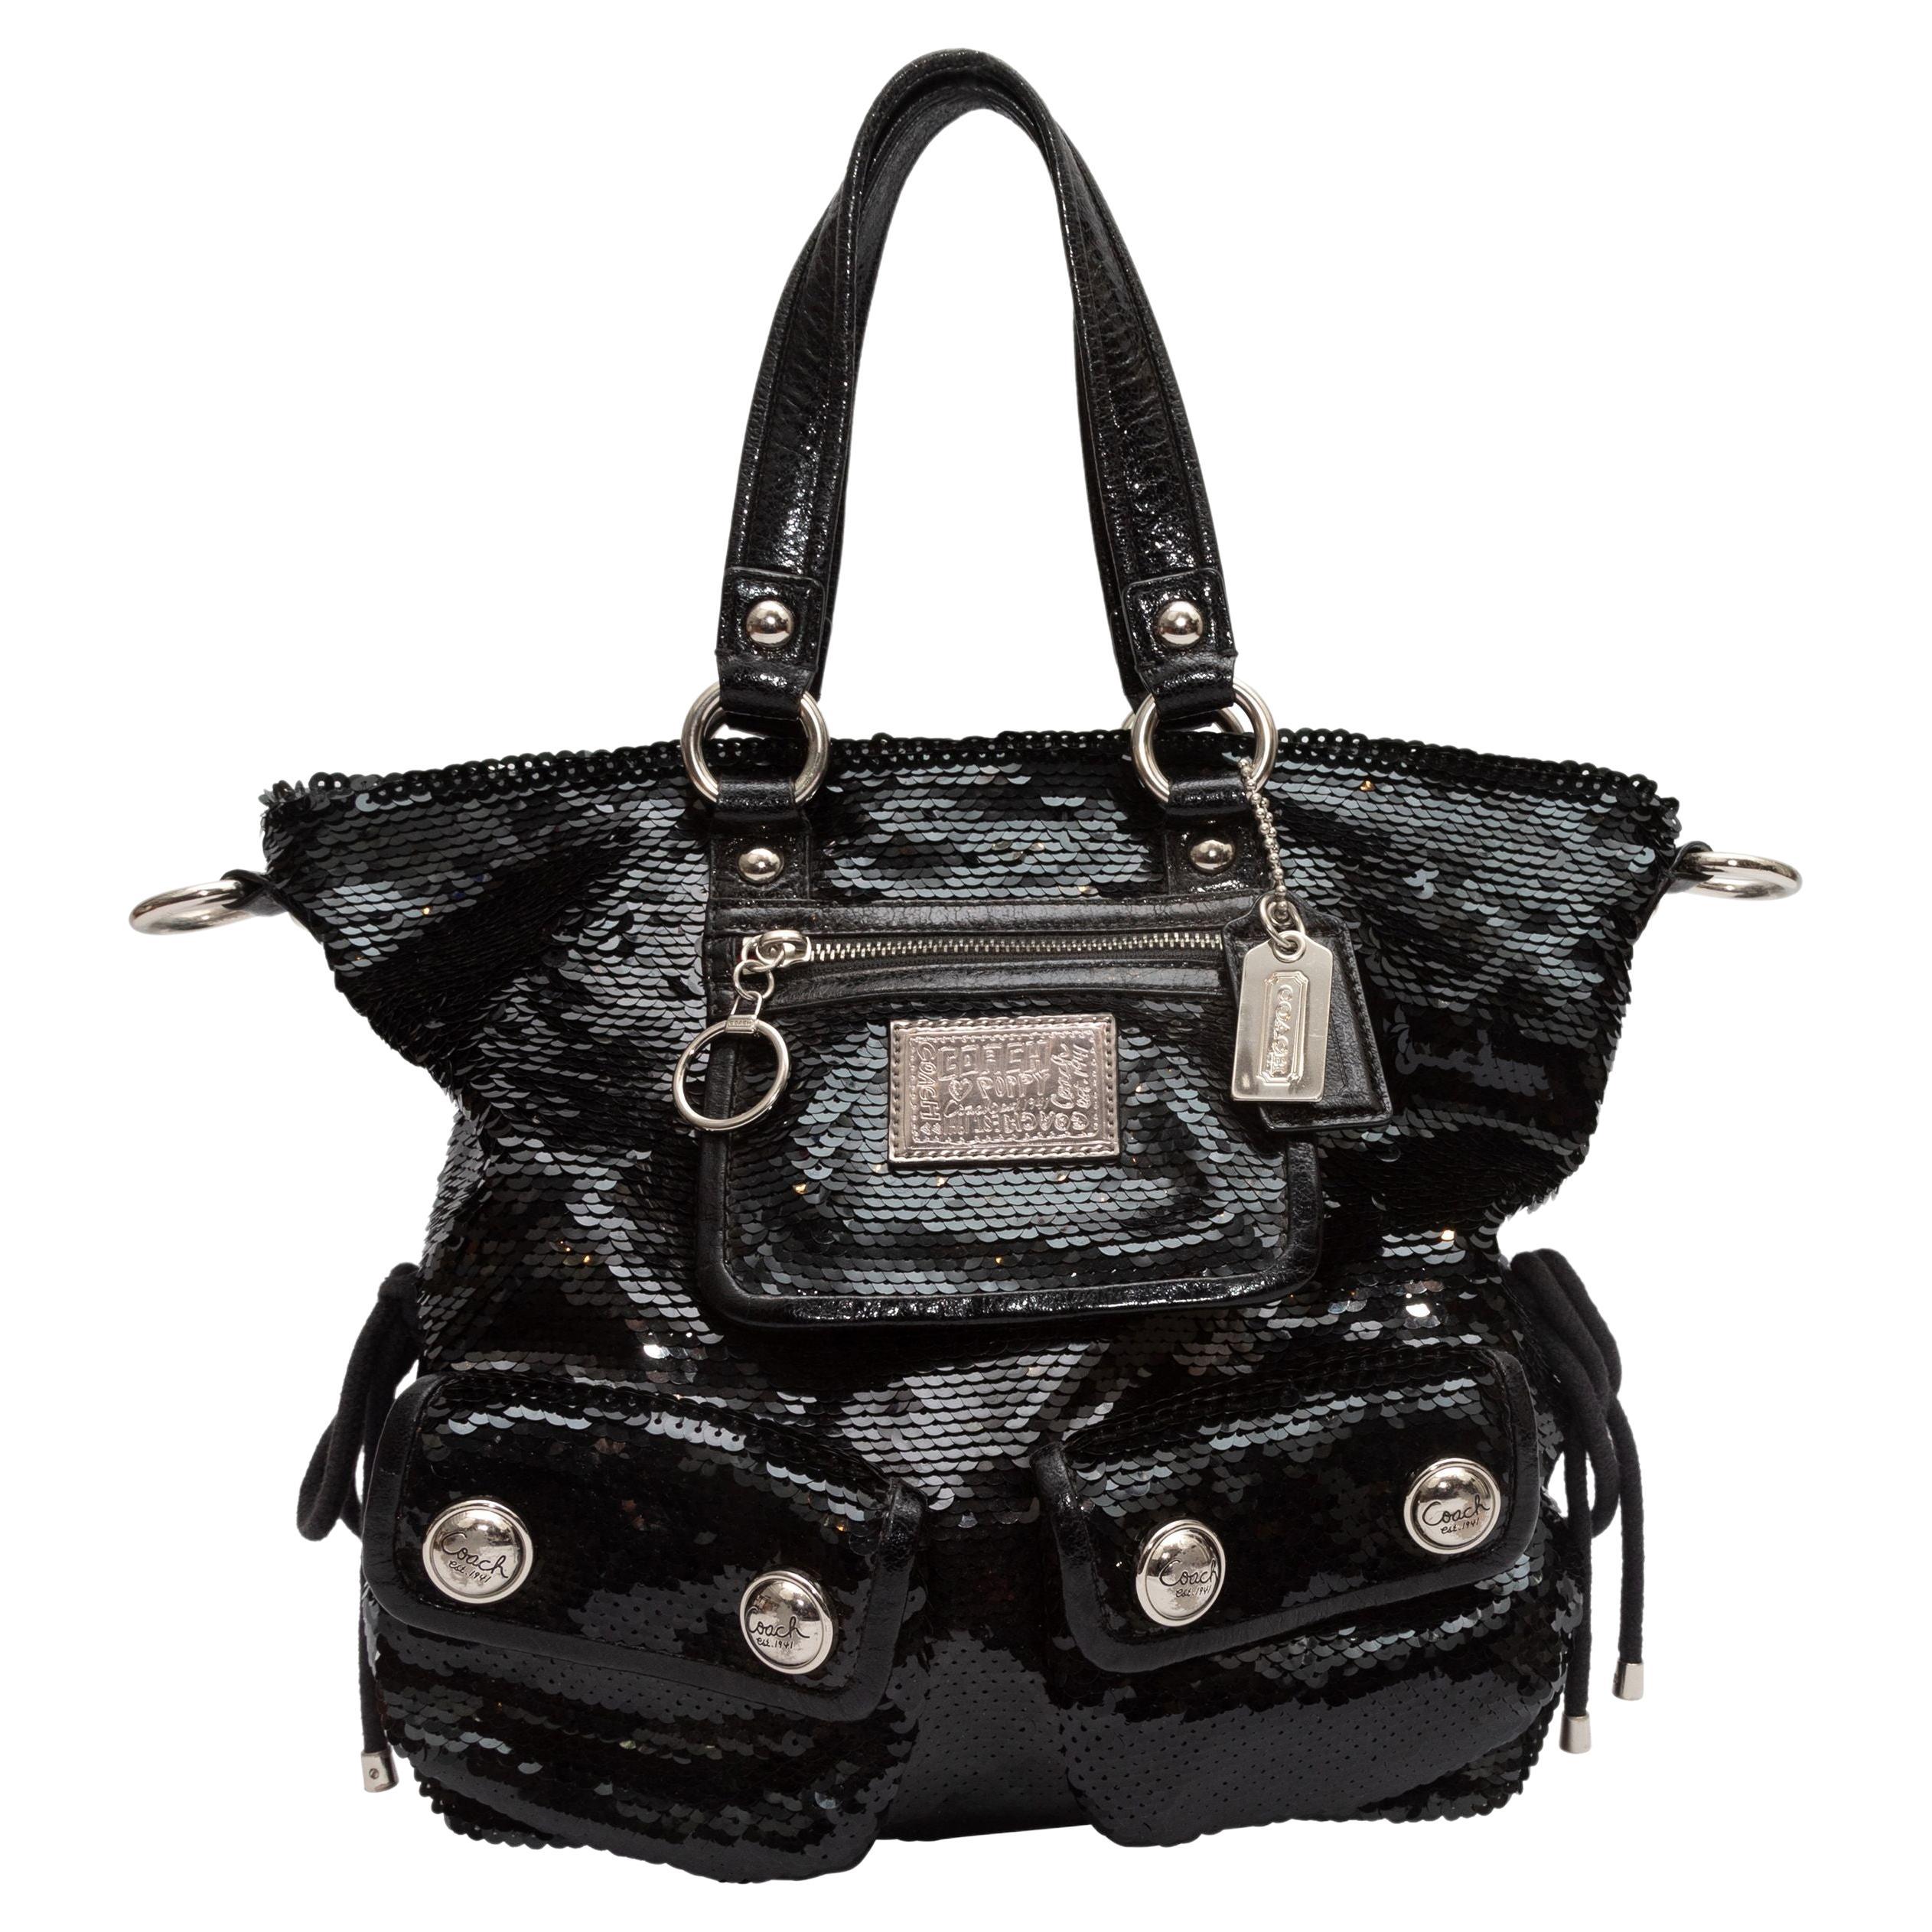 Coach Black Bags - 26 For Sale on 1stDibs  women's black coach bag, coach  black handbags, black coach hand bag